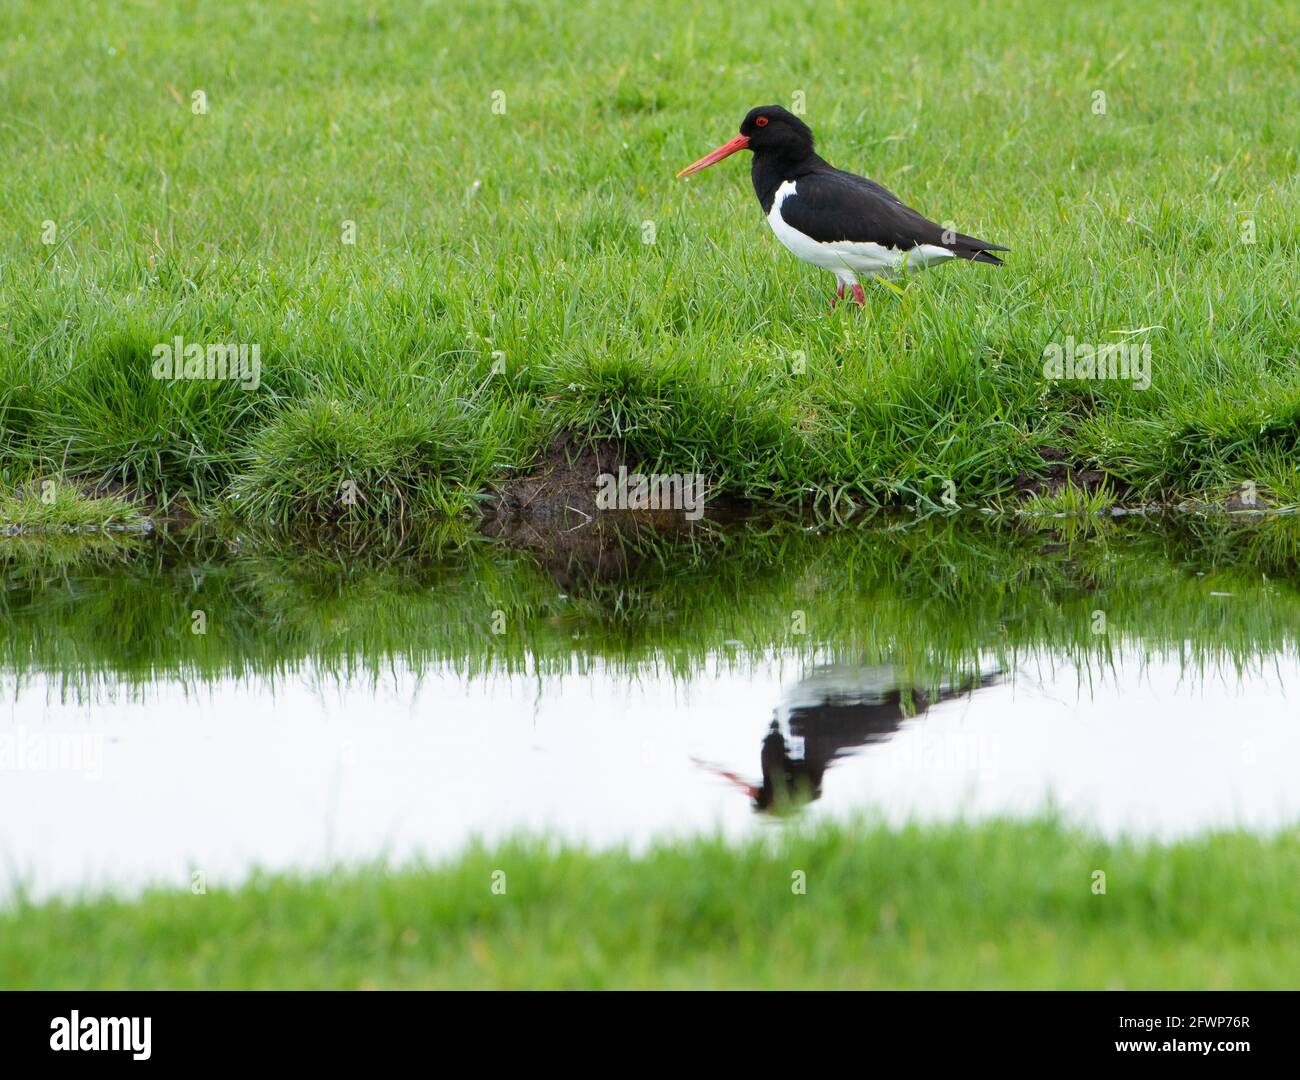 An oystercatcher in a field with a pond, Whitewell, Clitheroe, Lancashire, UK. Stock Photo